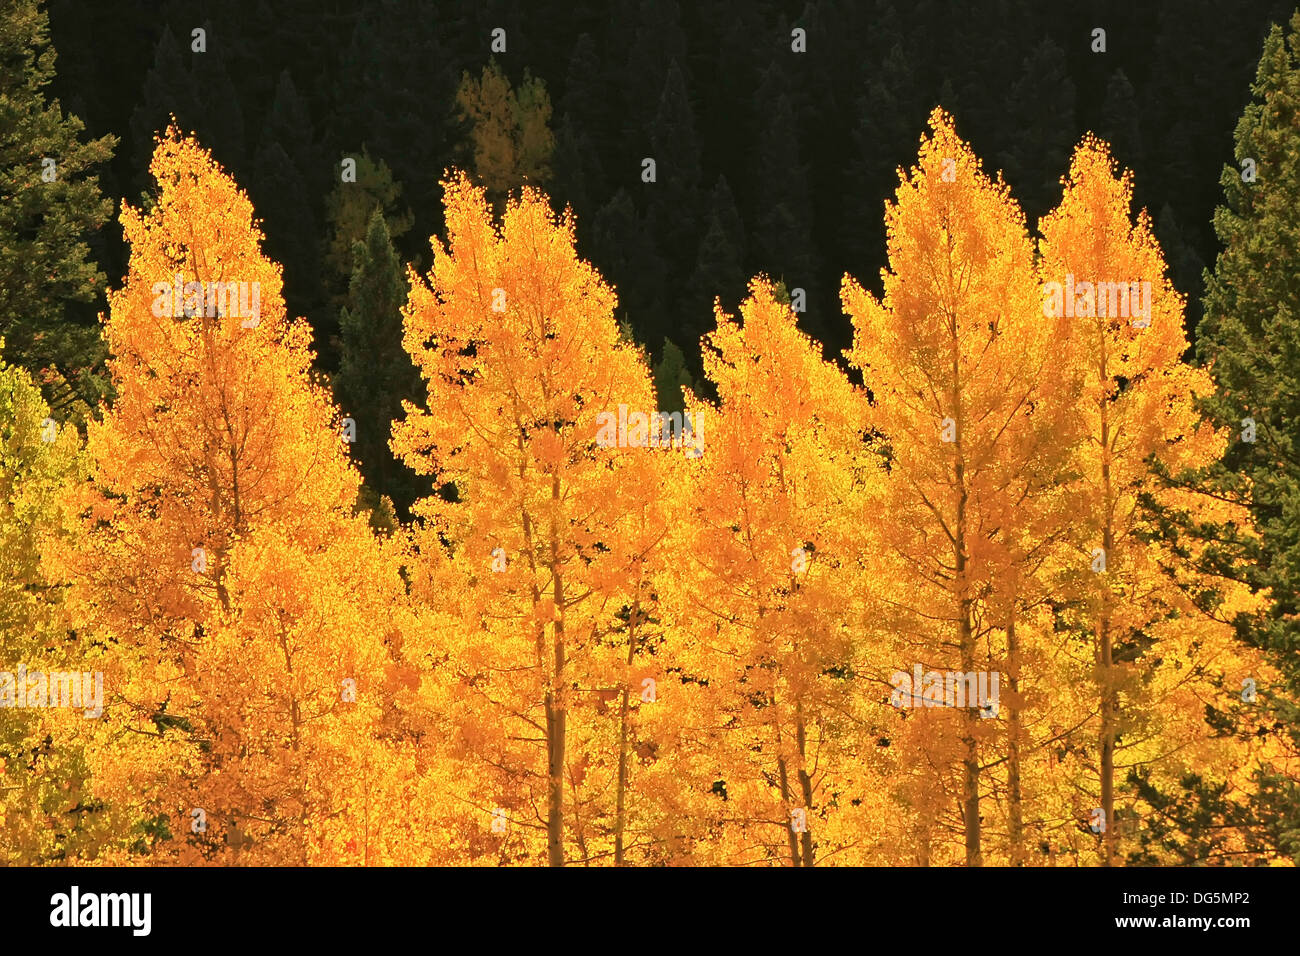 Aspen trees with fall color, San Juan National Forest, Colorado, USA Stock Photo